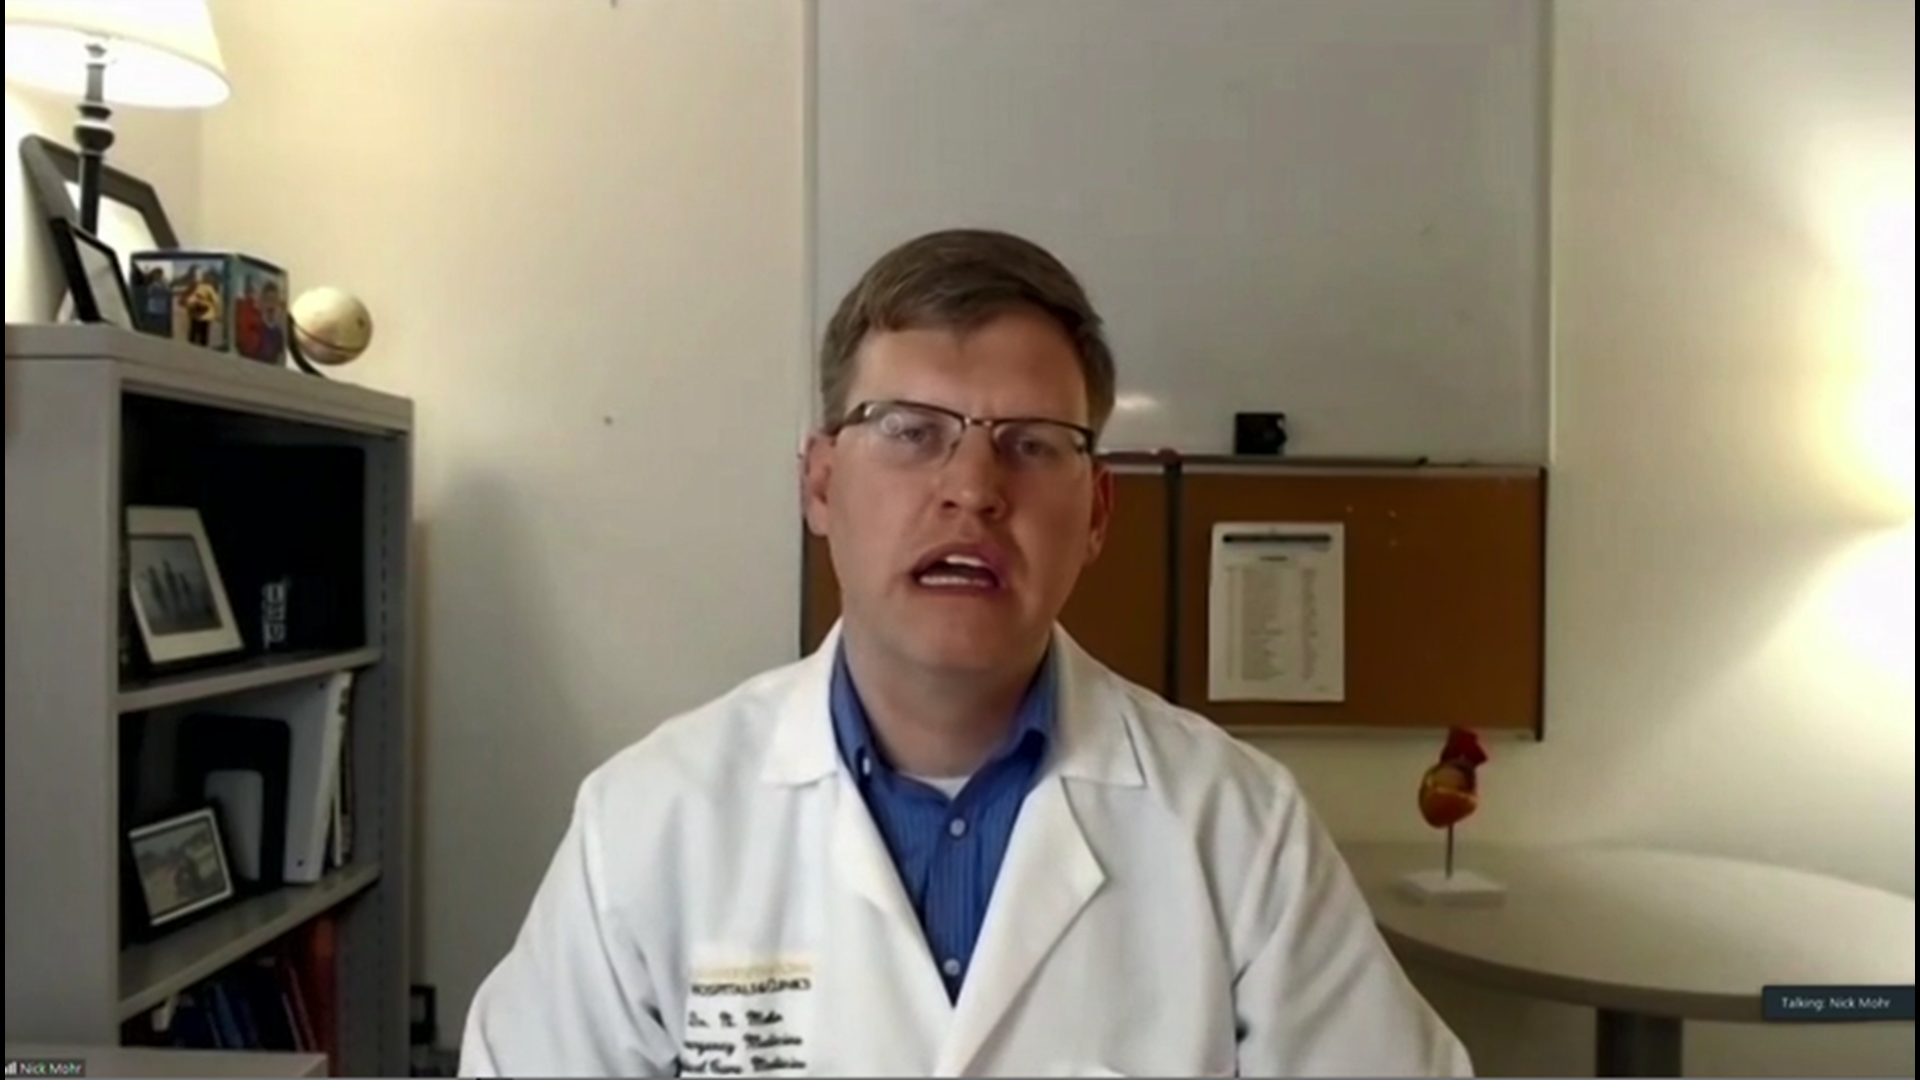 A doctor at the University of Iowa Hospitals and Clinics explains how physicians have been preparing for the spread of COVID-19.